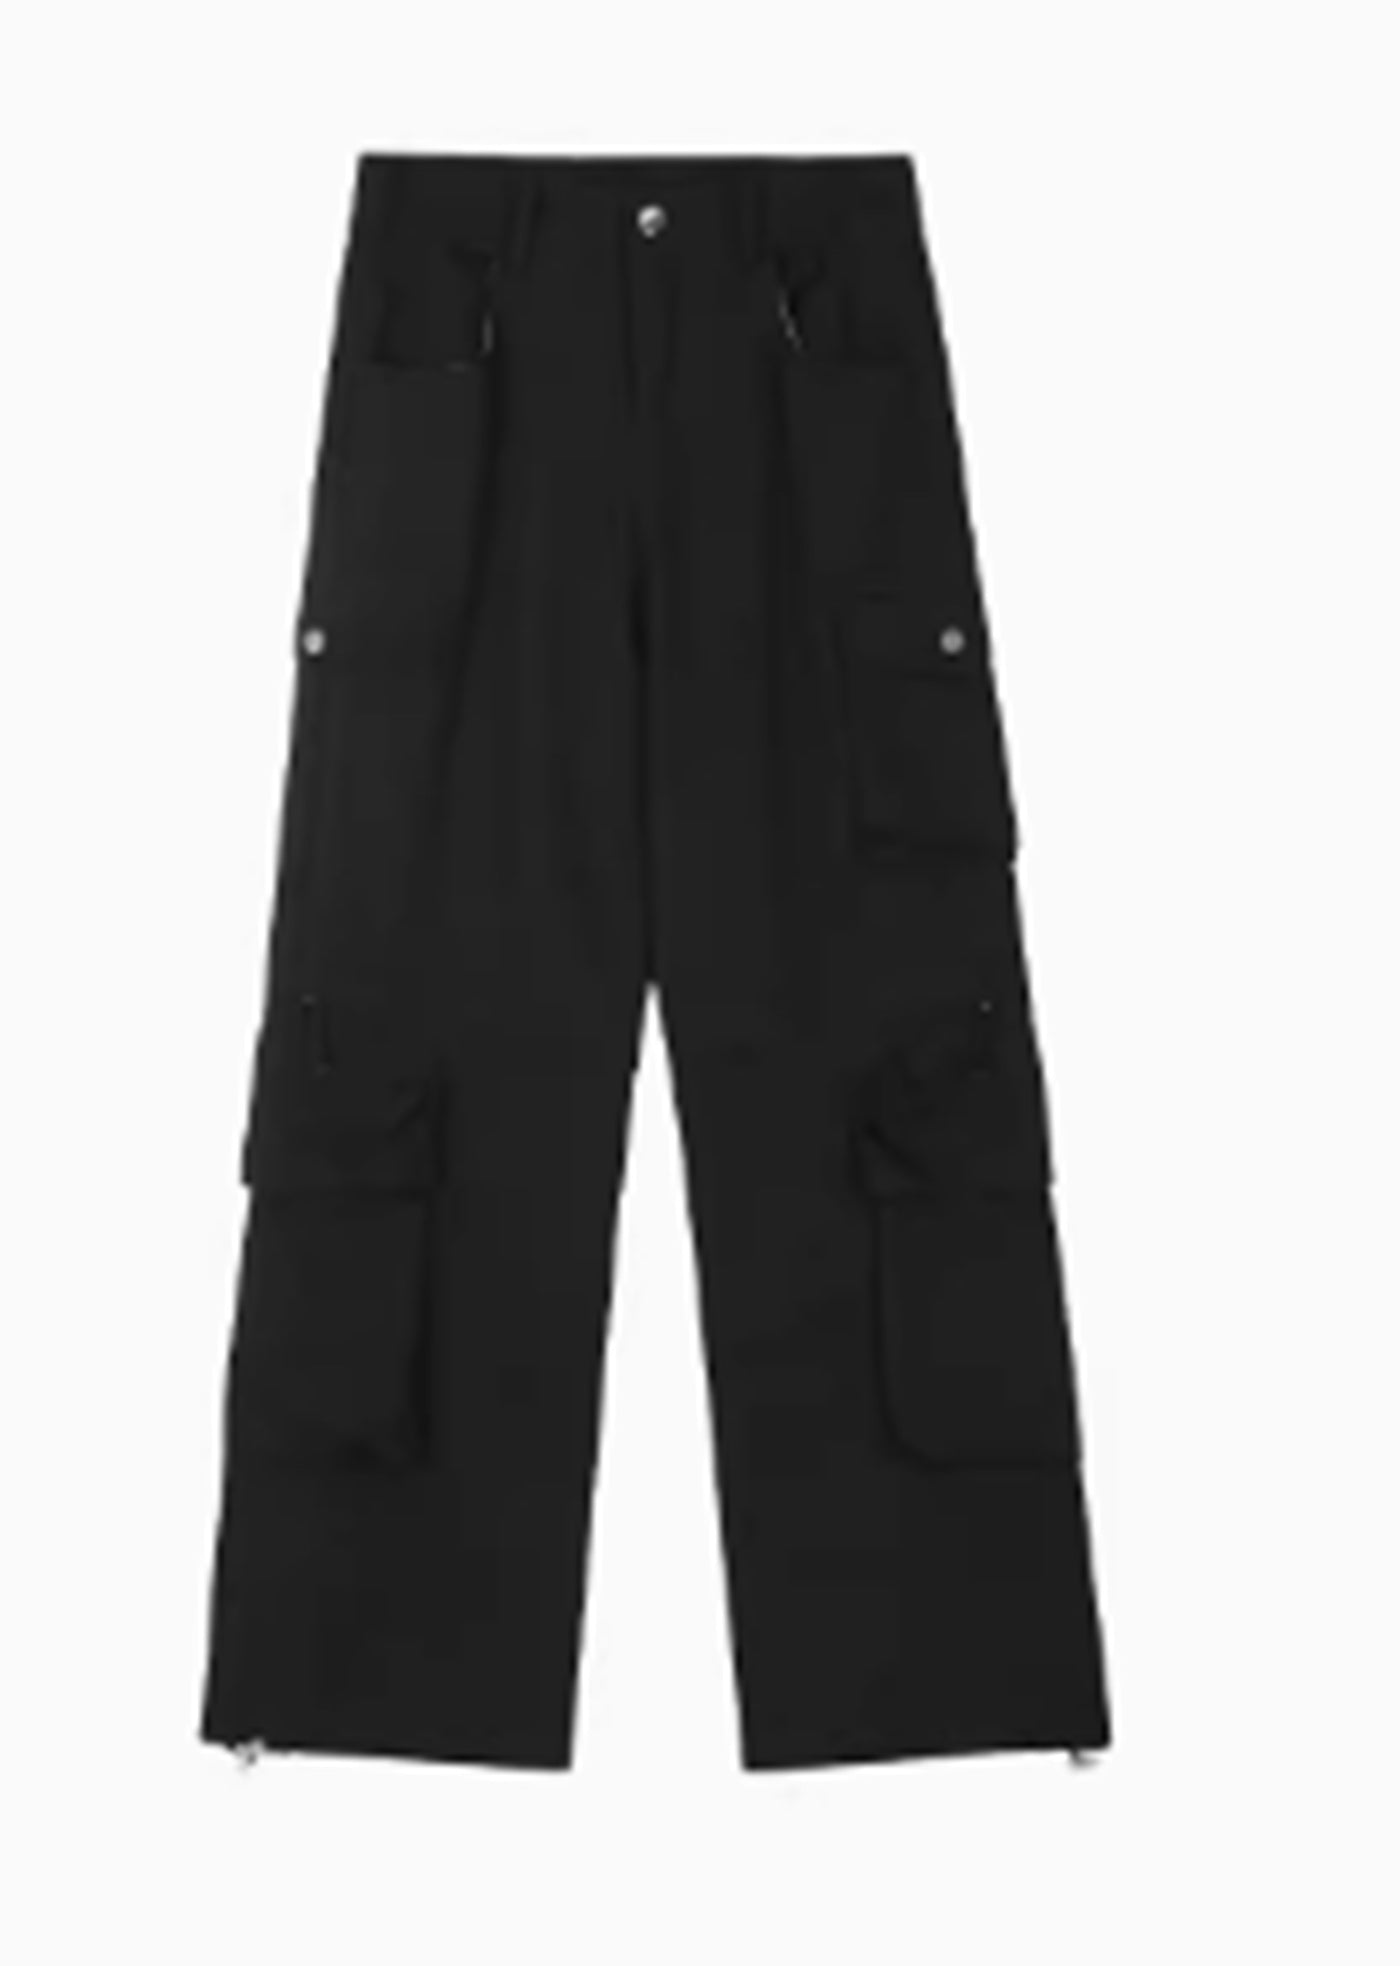 [4/29 New] 2WAY gimmick design straight silhouette cargo pants HL3038